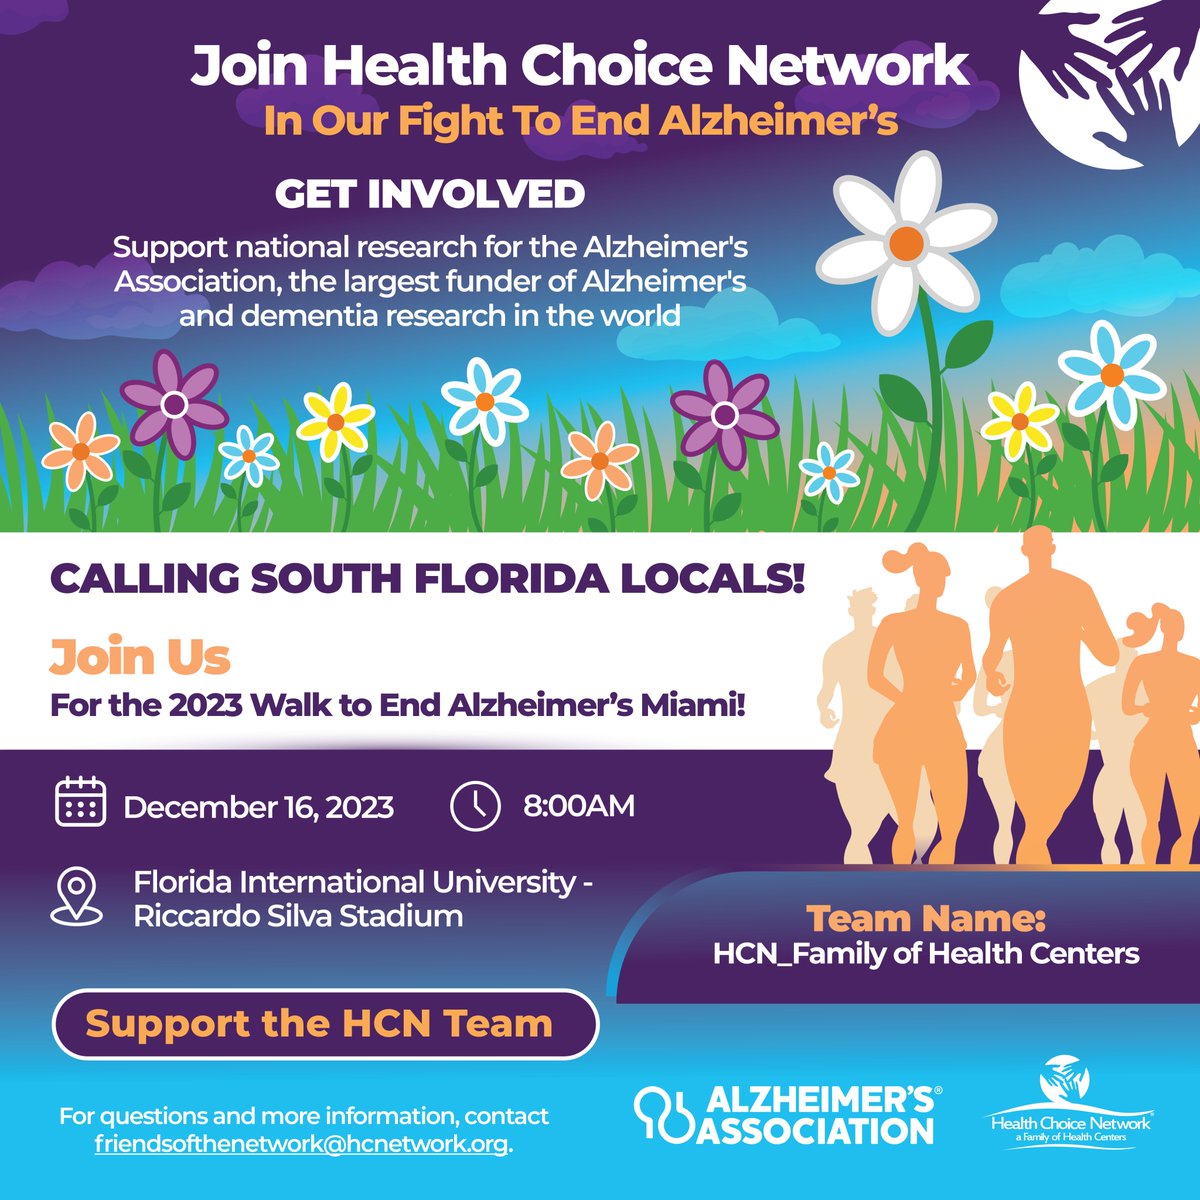 South Florida Locals: HCN is inviting our HCN Family to join us as we walk to raise awareness and funds for Alzheimer's on December 16th for the 2023 Walk to End Alzheimer's Miami. Join the team: act.alz.org/site/TR/Walk20…

#EndAlzheimers #AlzheimersAwareness #EndAlz #Walk2EndAlz